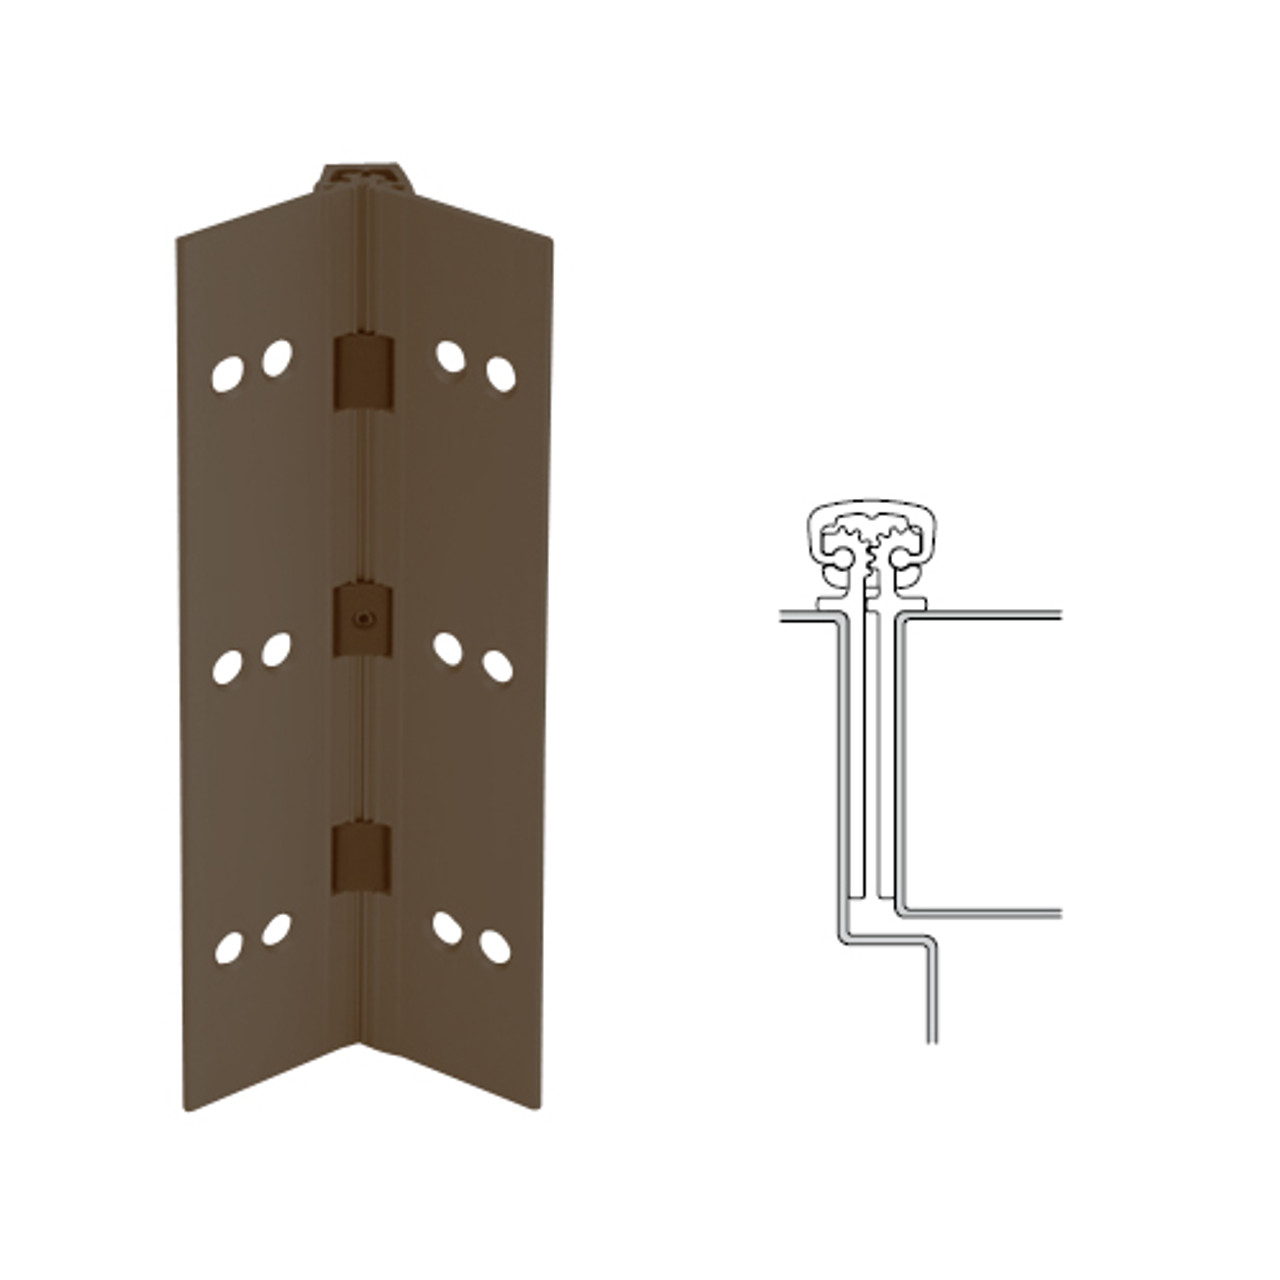 027XY-313AN-85-SECHM IVES Full Mortise Continuous Geared Hinges with Security Screws - Hex Pin Drive in Dark Bronze Anodized